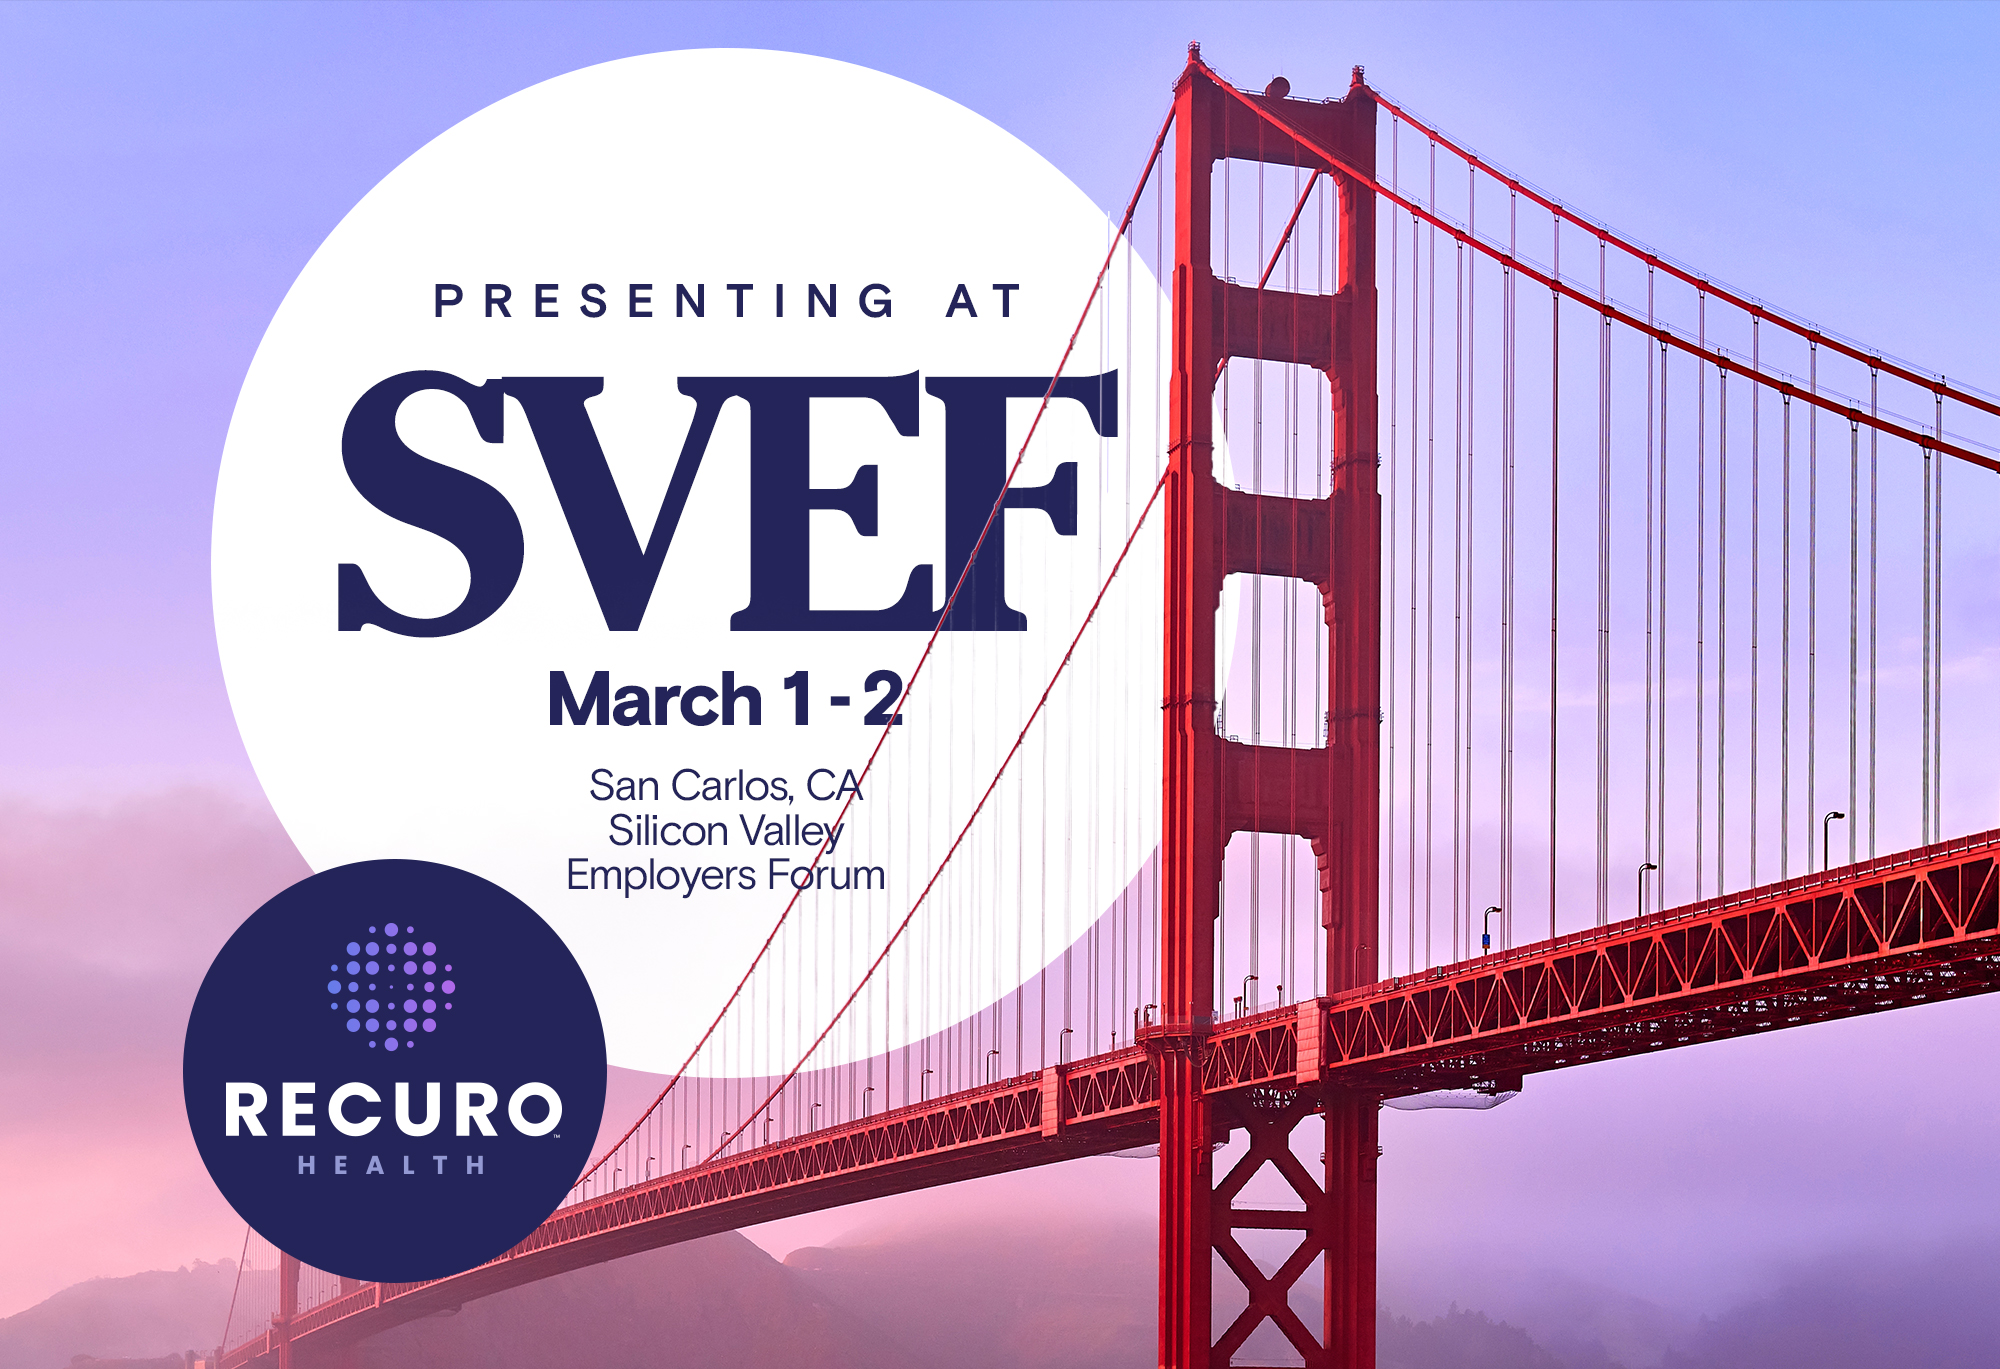 Recuro Health Presents at Silicon Valley Employers Forum – Innovation Showcase